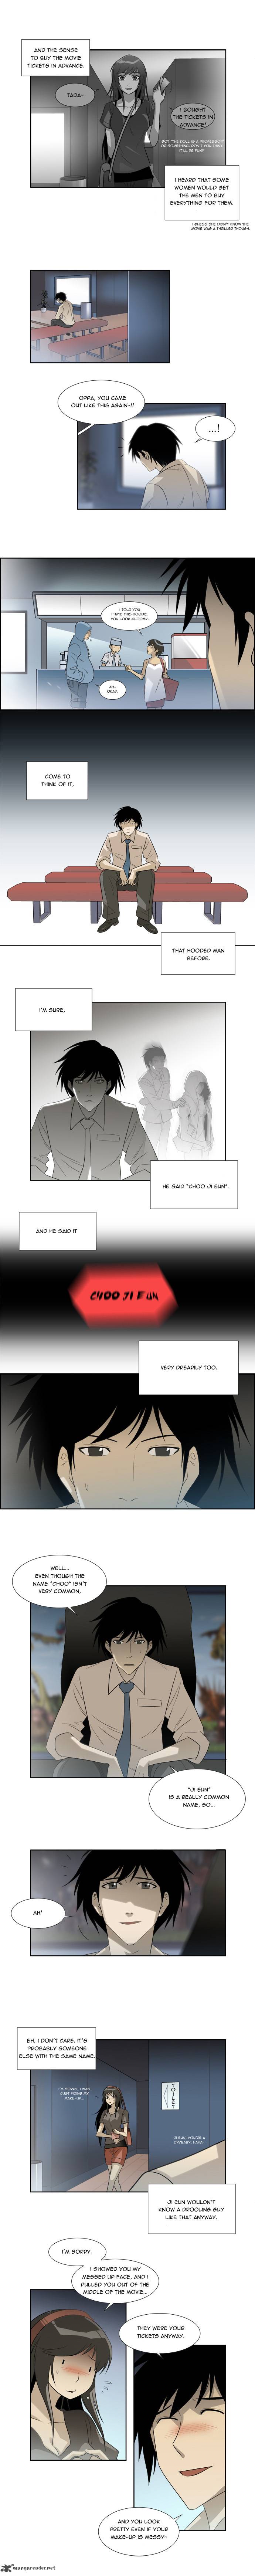 Melo Holic Chapter 16 Page 5